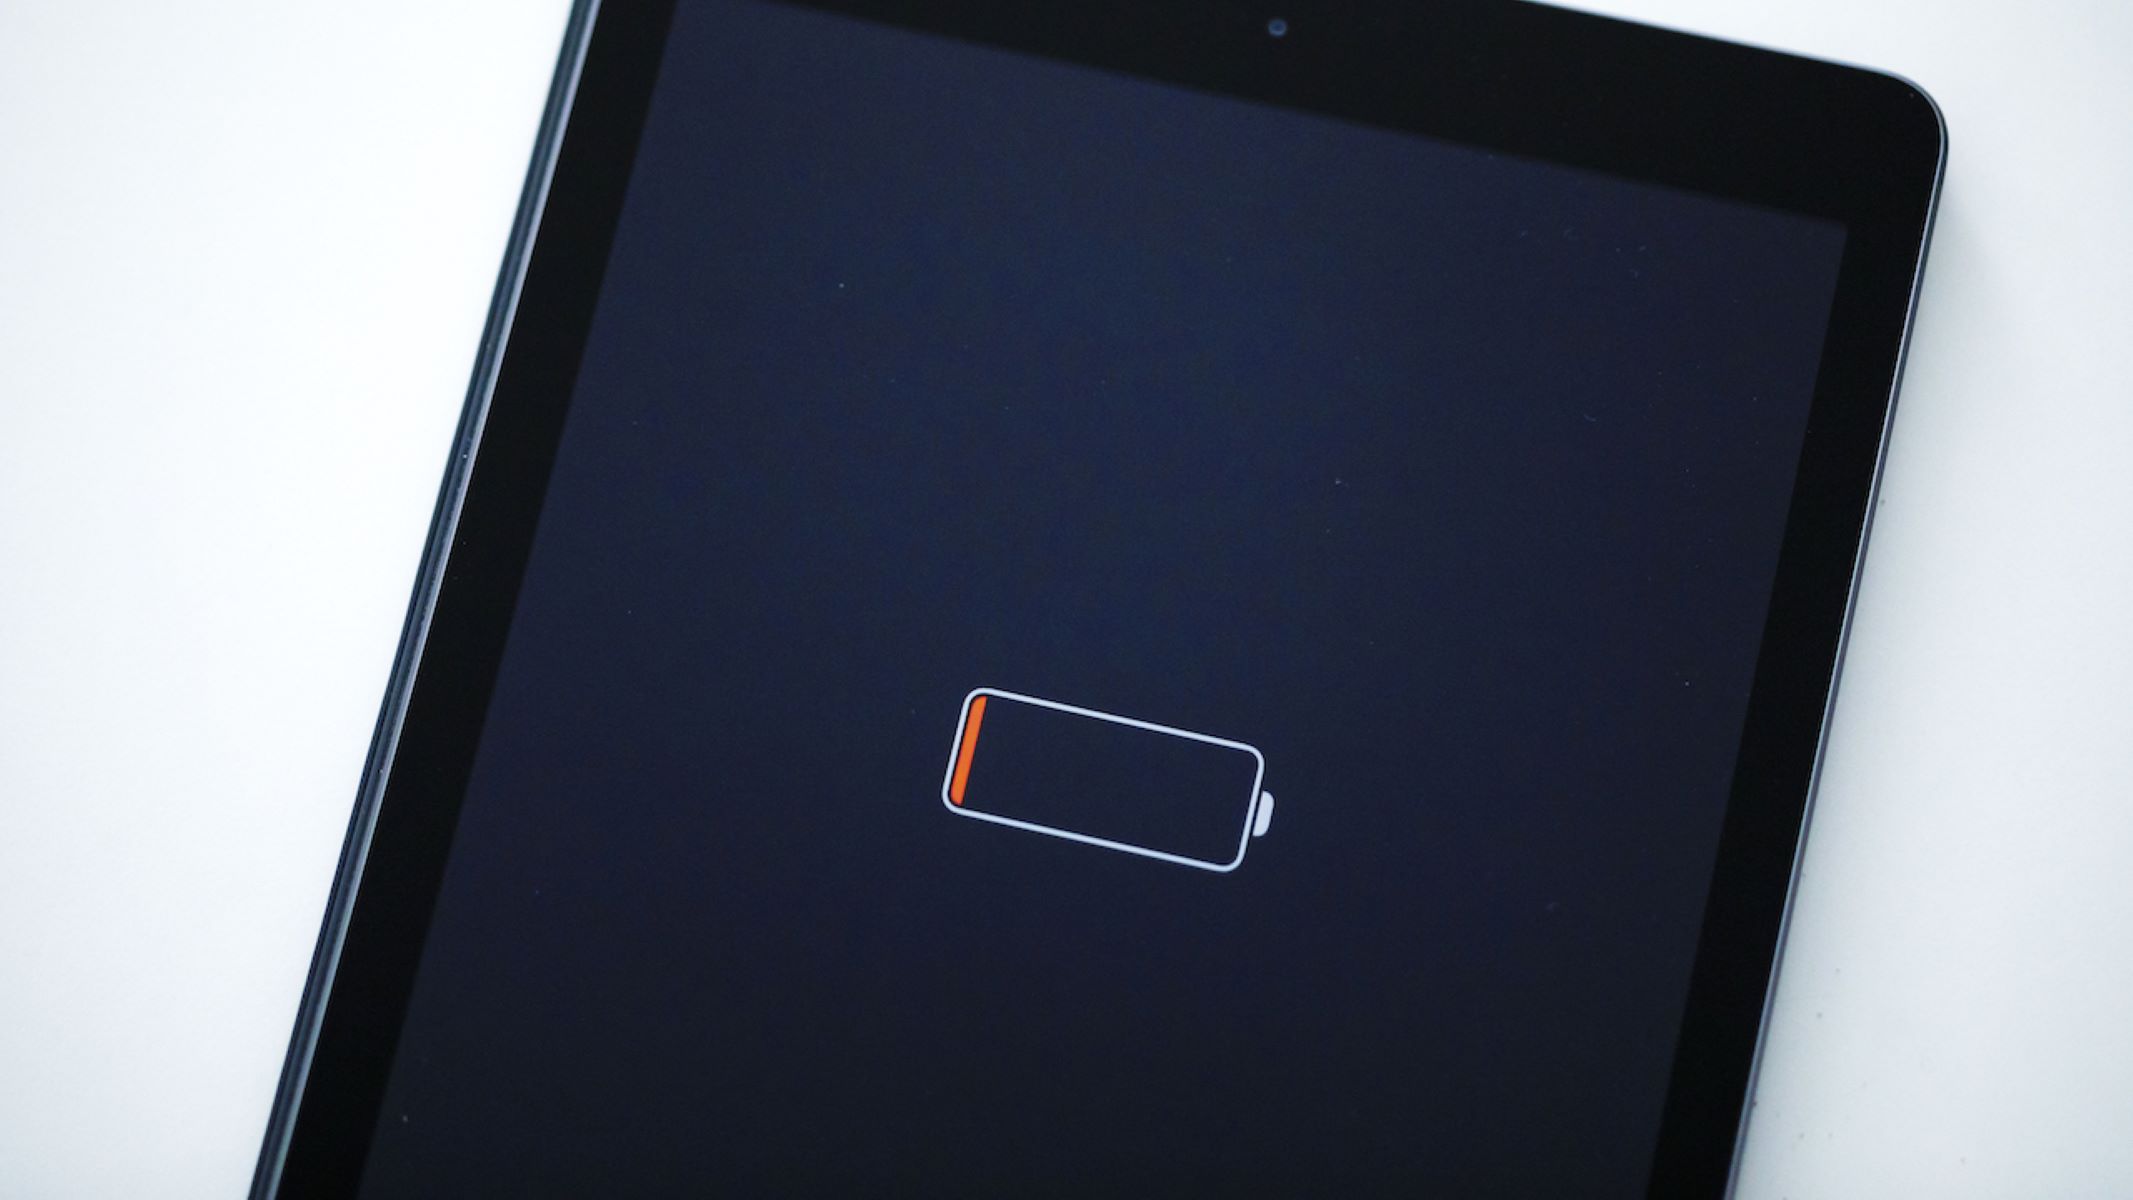 IPad Battery Duration: What You Should Know